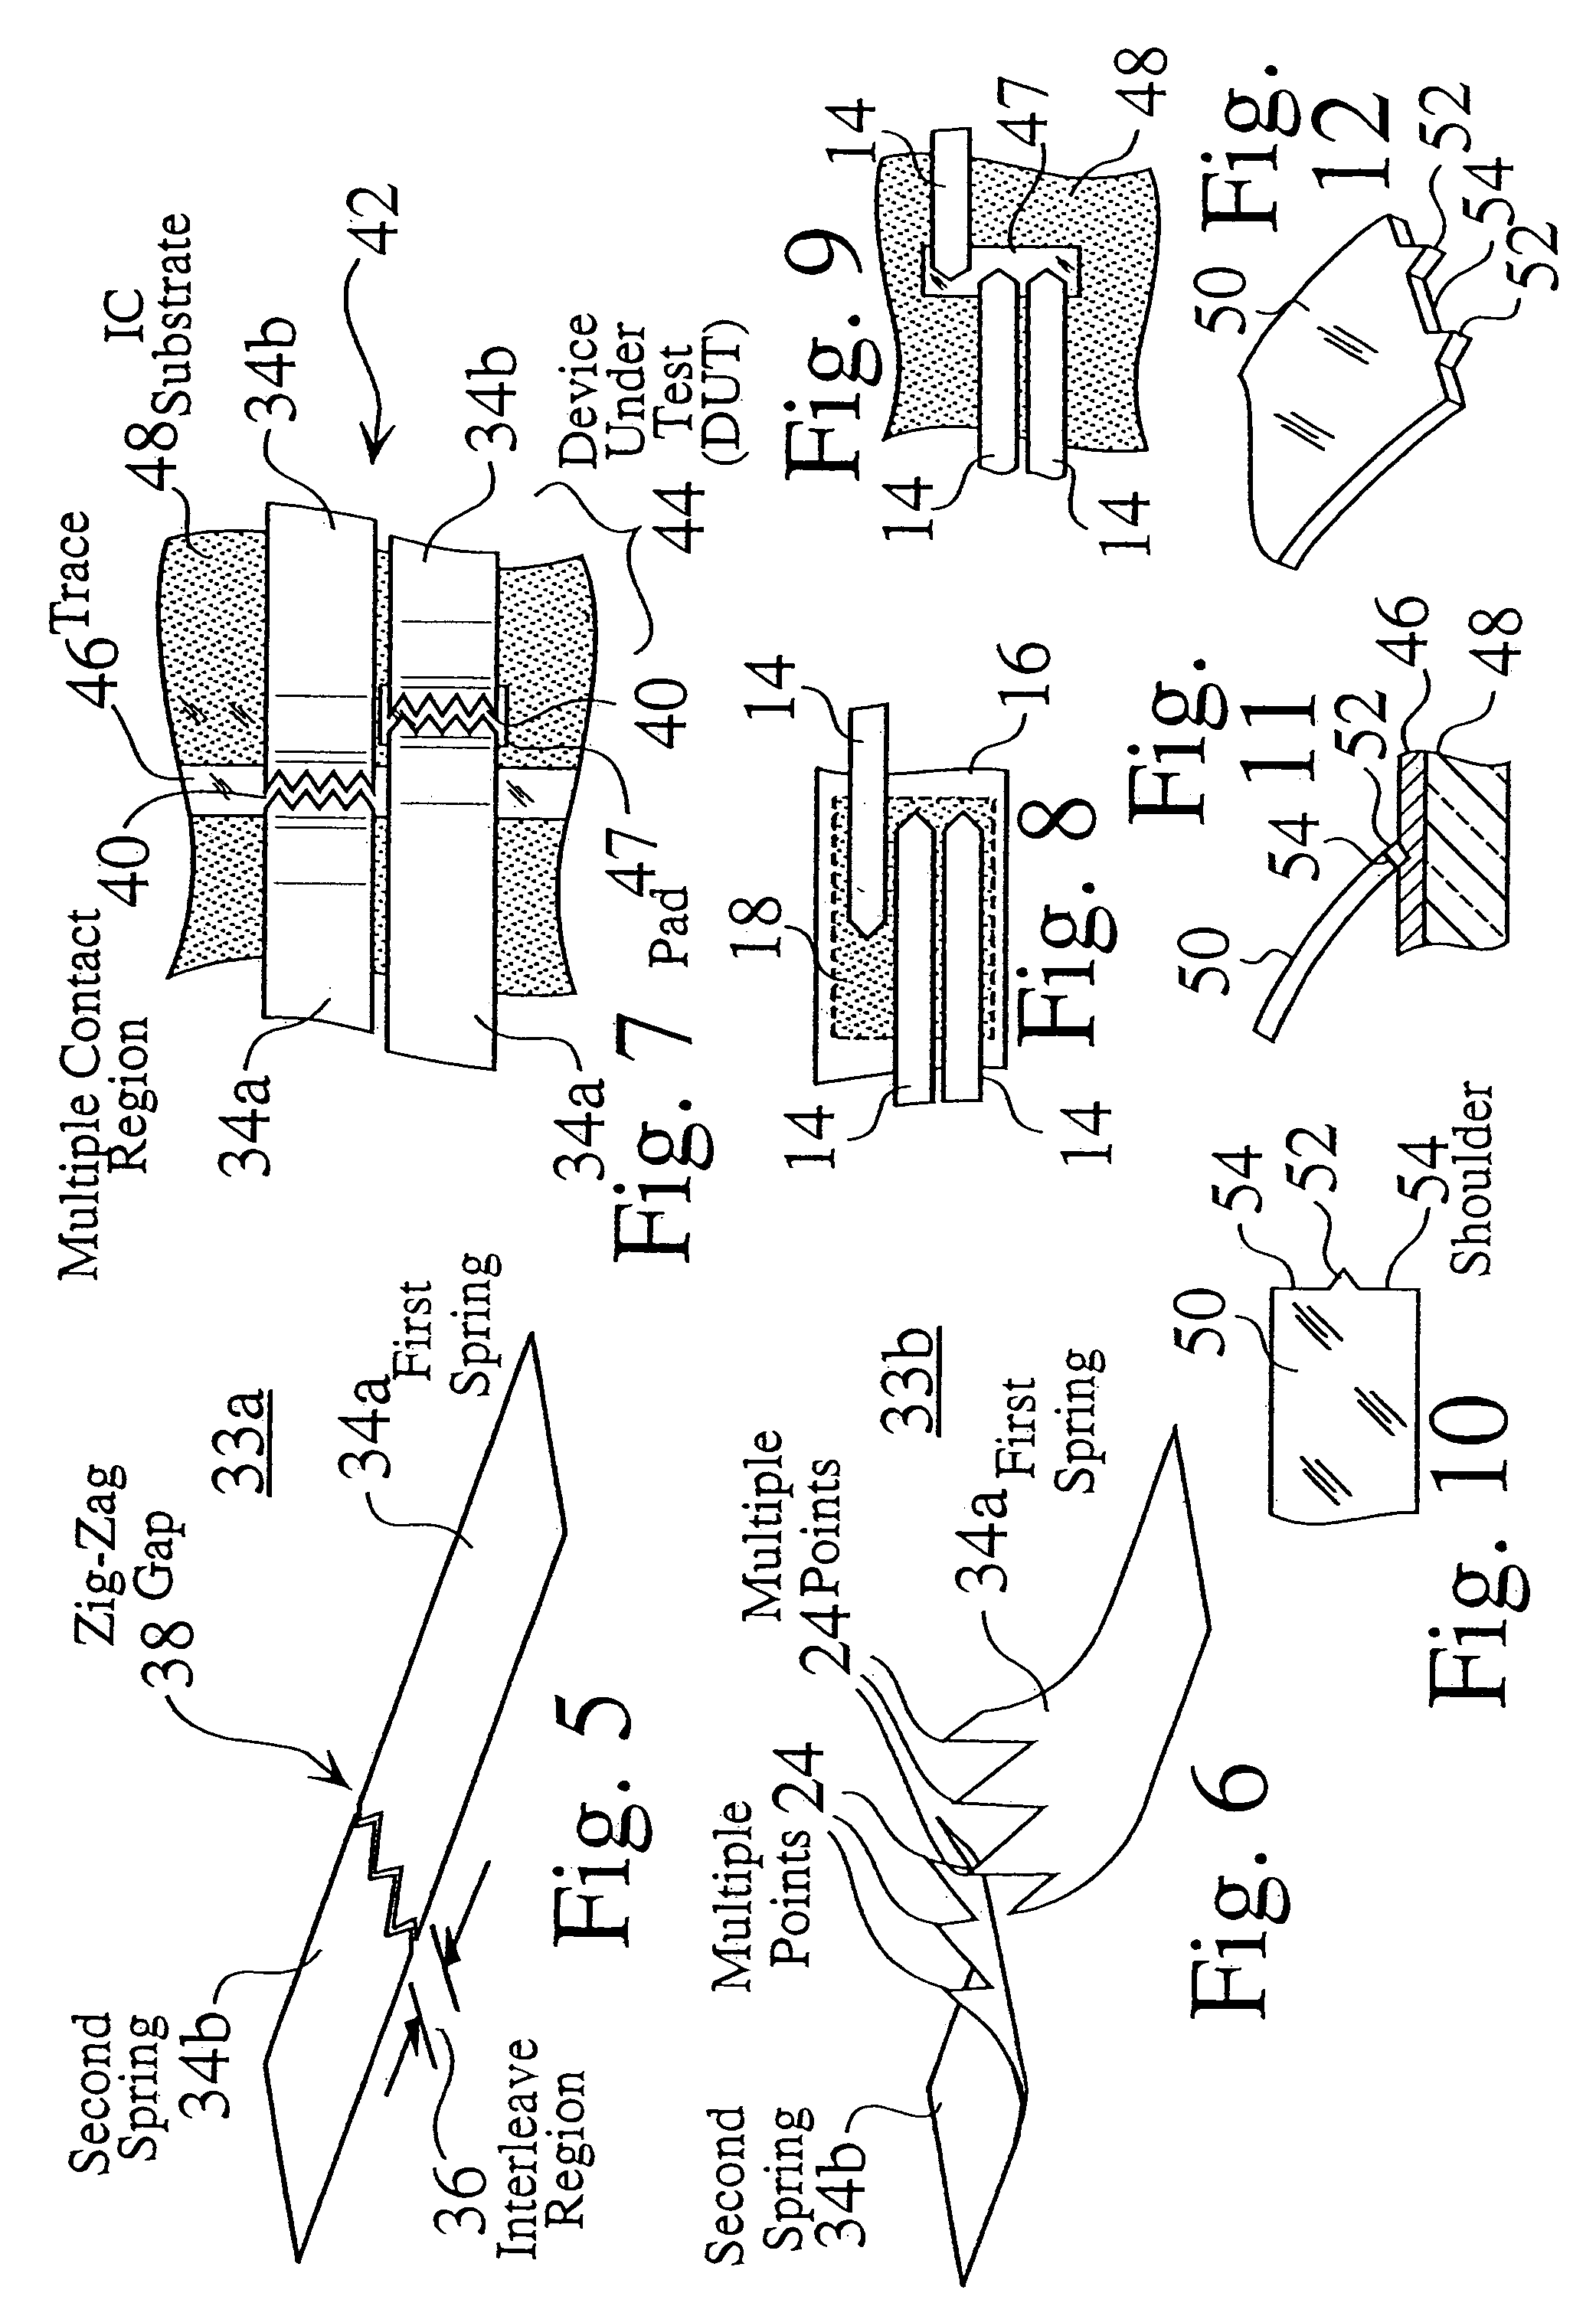 Massively parallel interface for electronic circuit